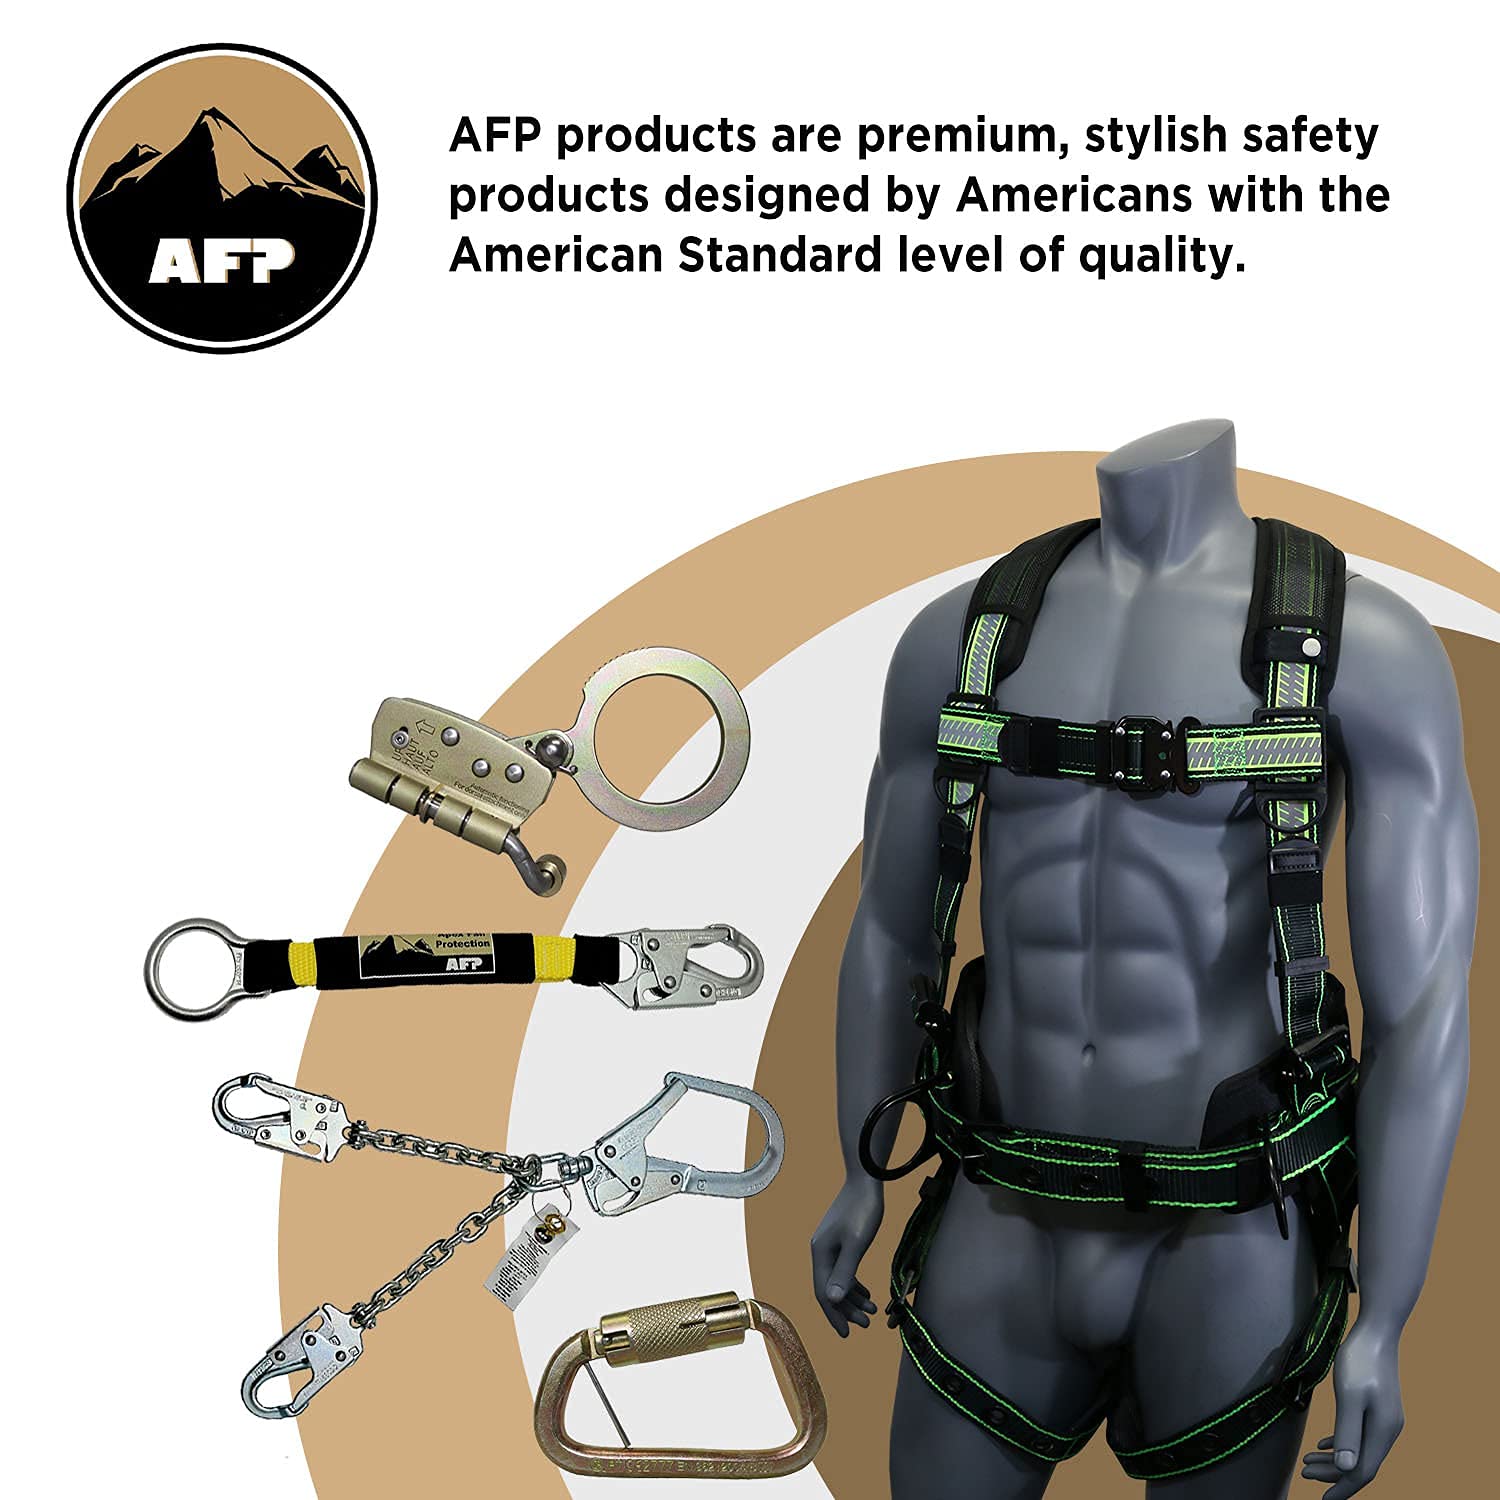 AFP Fall Protection Premium Hi-Viz Lime & Black Reflective Safety Harness, Vented & Padded Shoulder, Legs & Back, 8” Thick Back Support Belt, 3 D-Rings, Tongue Buckle, Quick Release (OSHA/ANSI PPE)